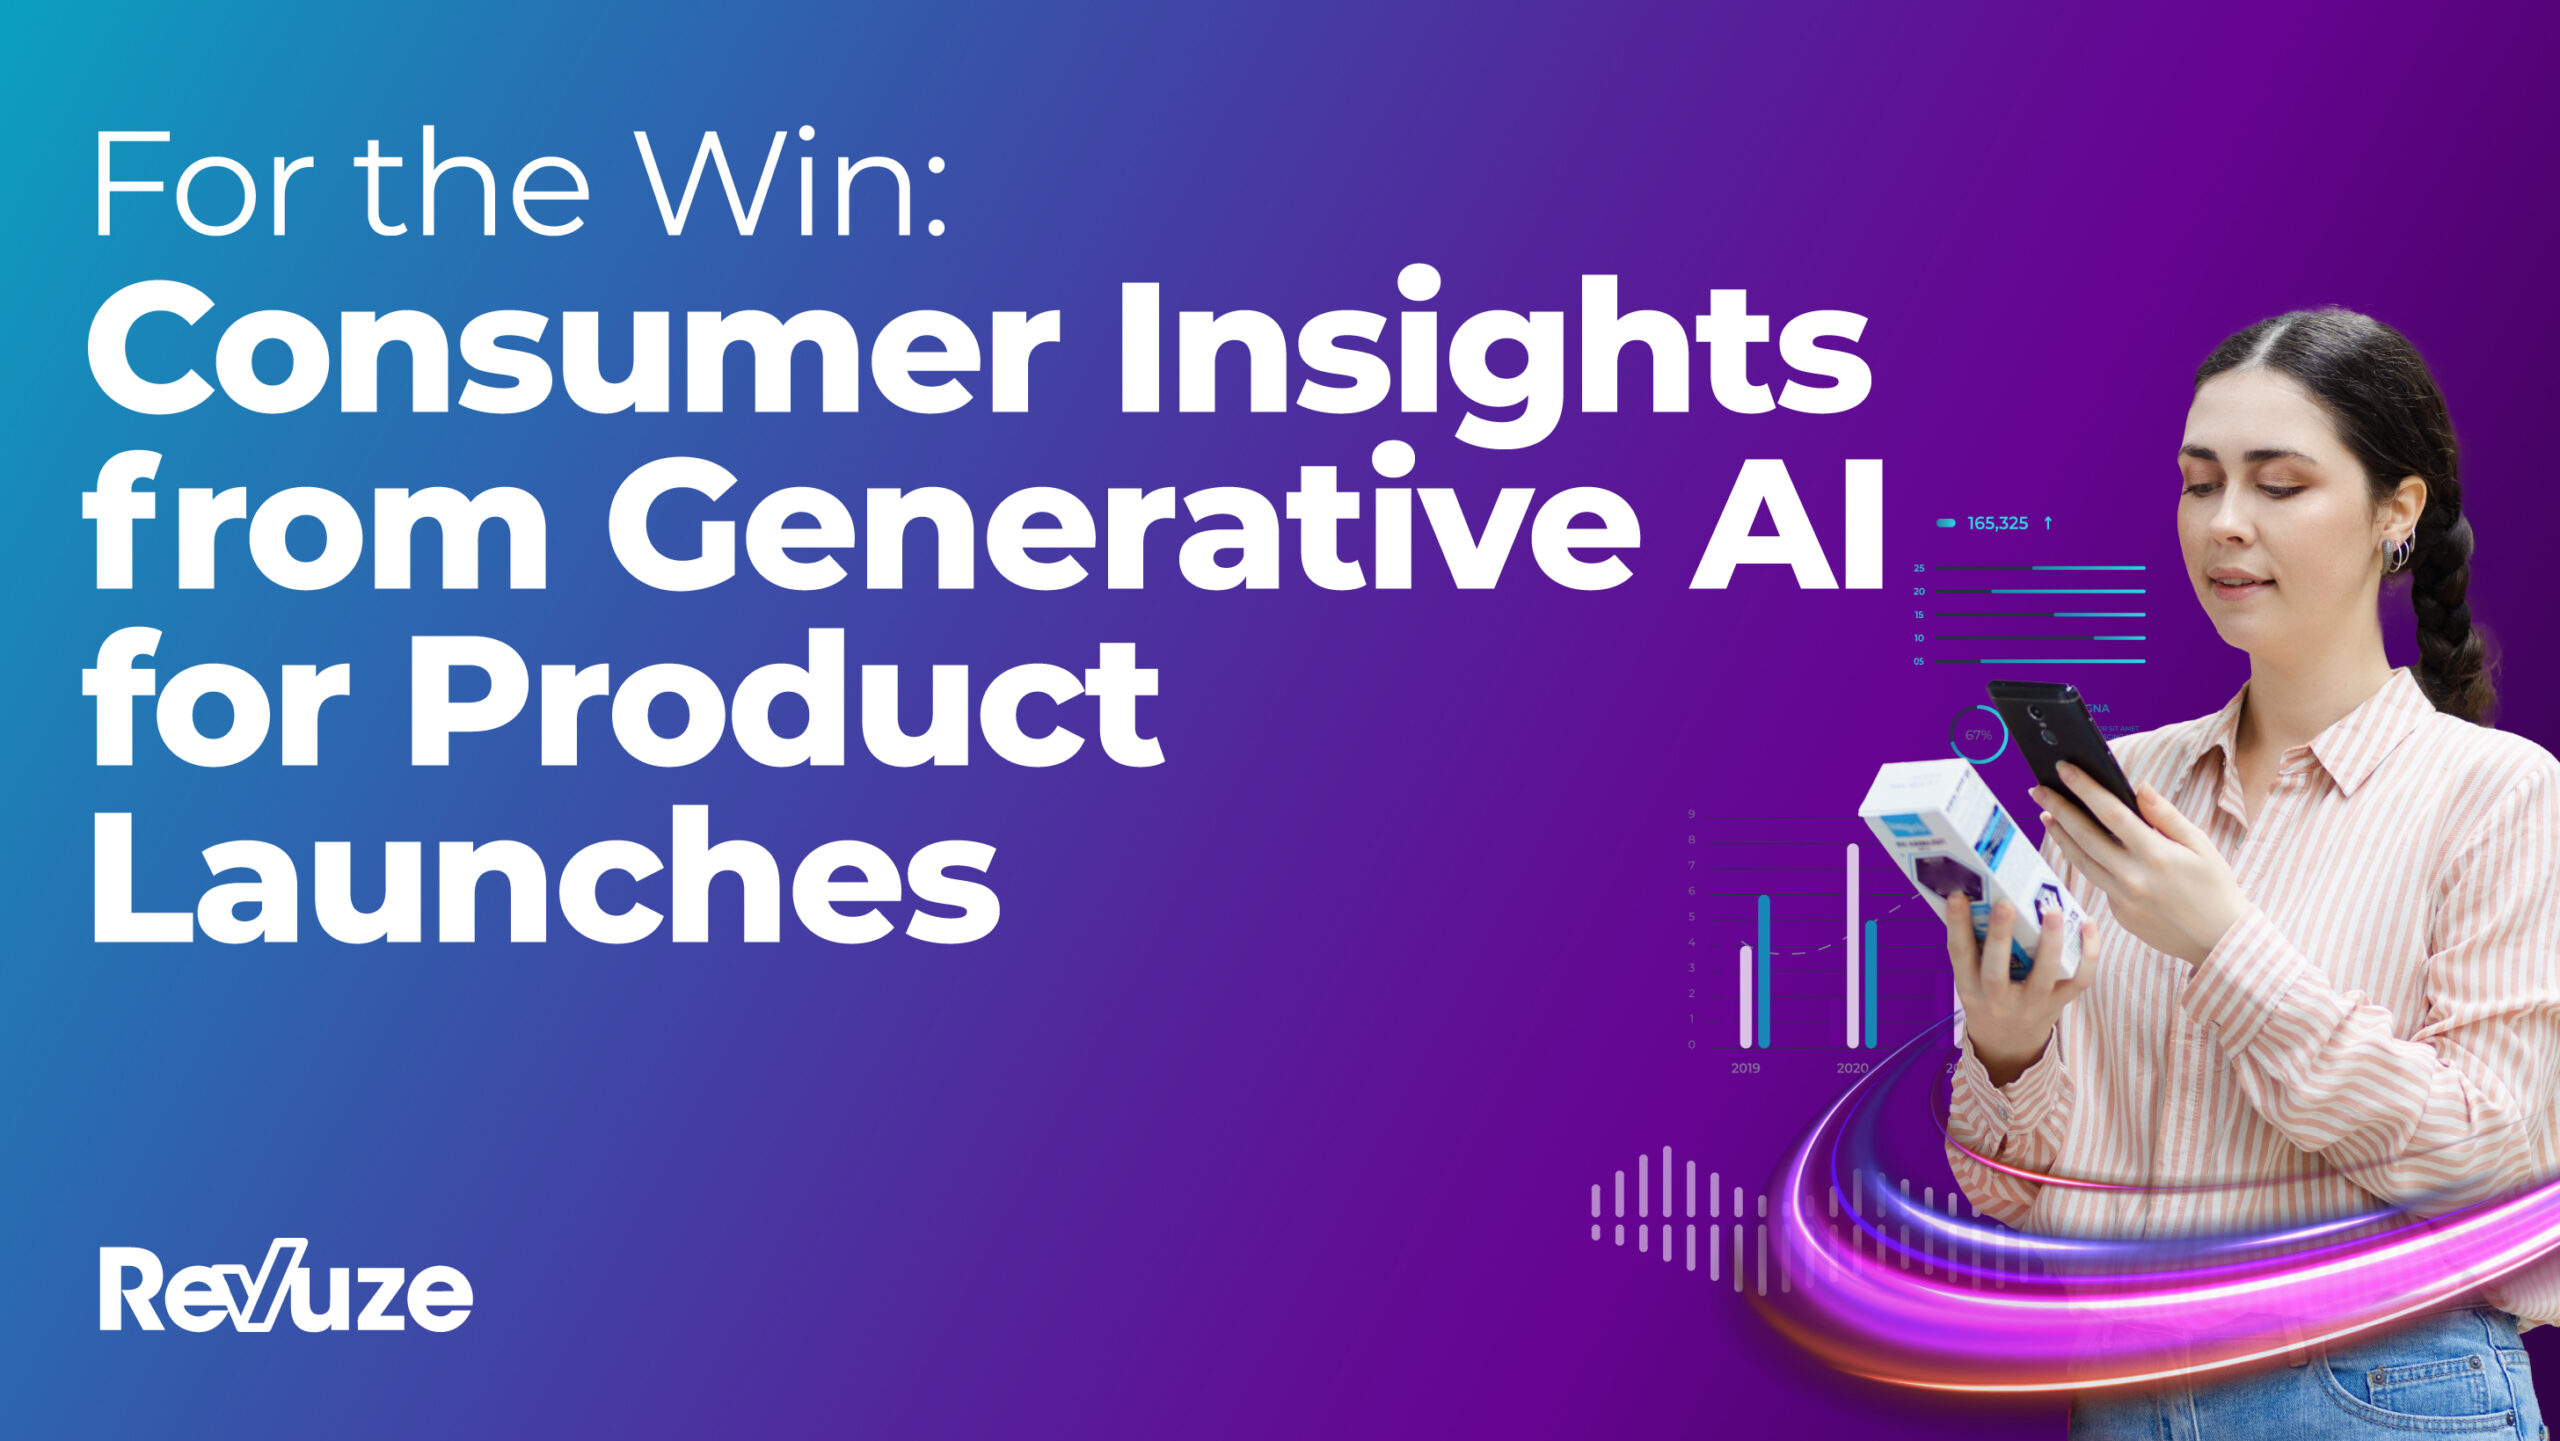 For the Win: Consumer Insights from Generative AI for Product Launches